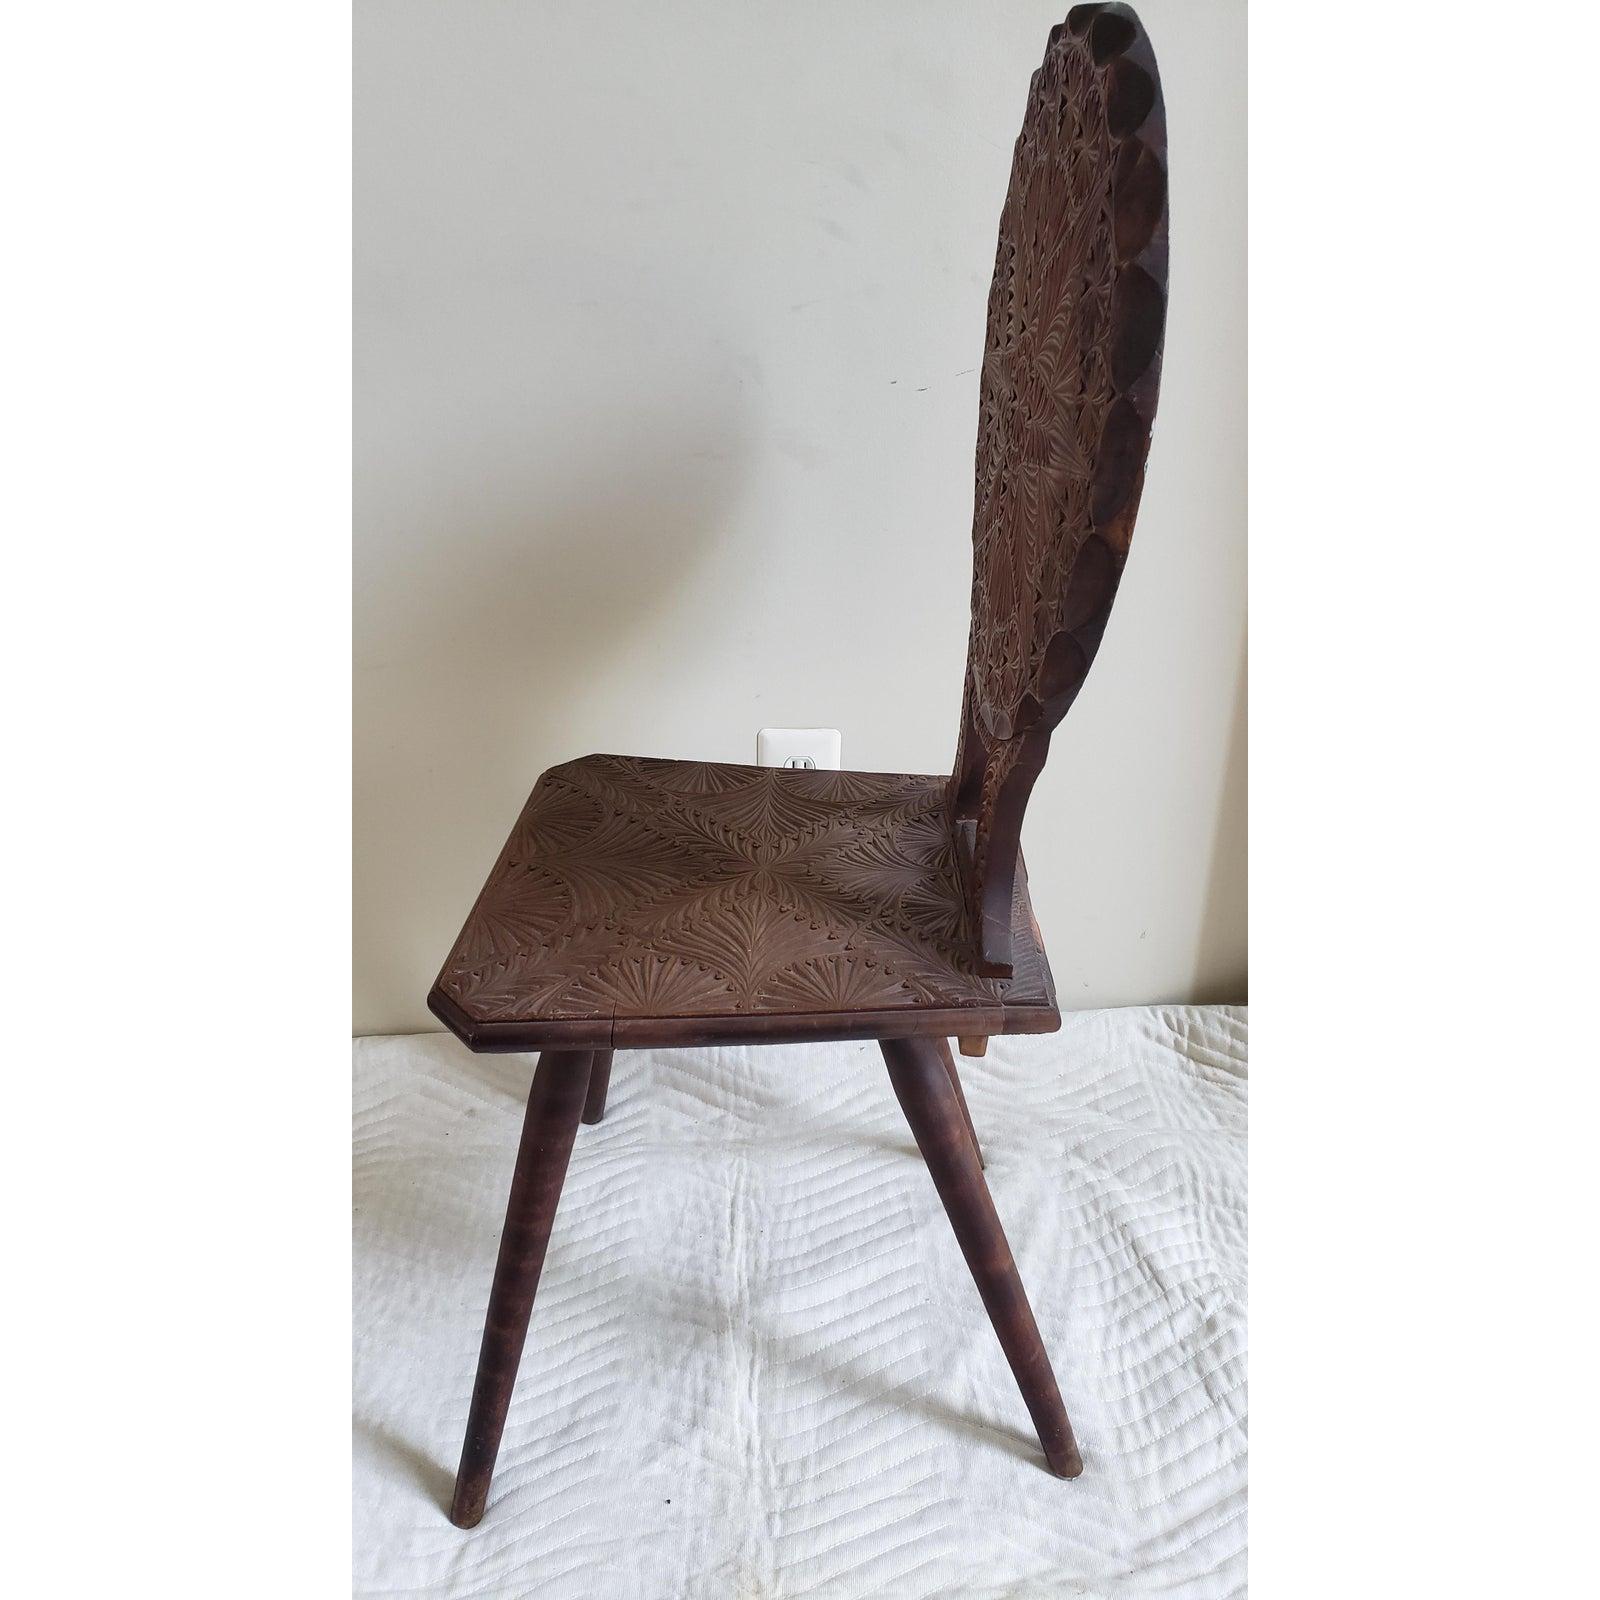 Antique hand carved chair in excellent vintage condition.
Chair measures 18 W x 18 D x 41 H.
Very fine carvings. Solid wood.